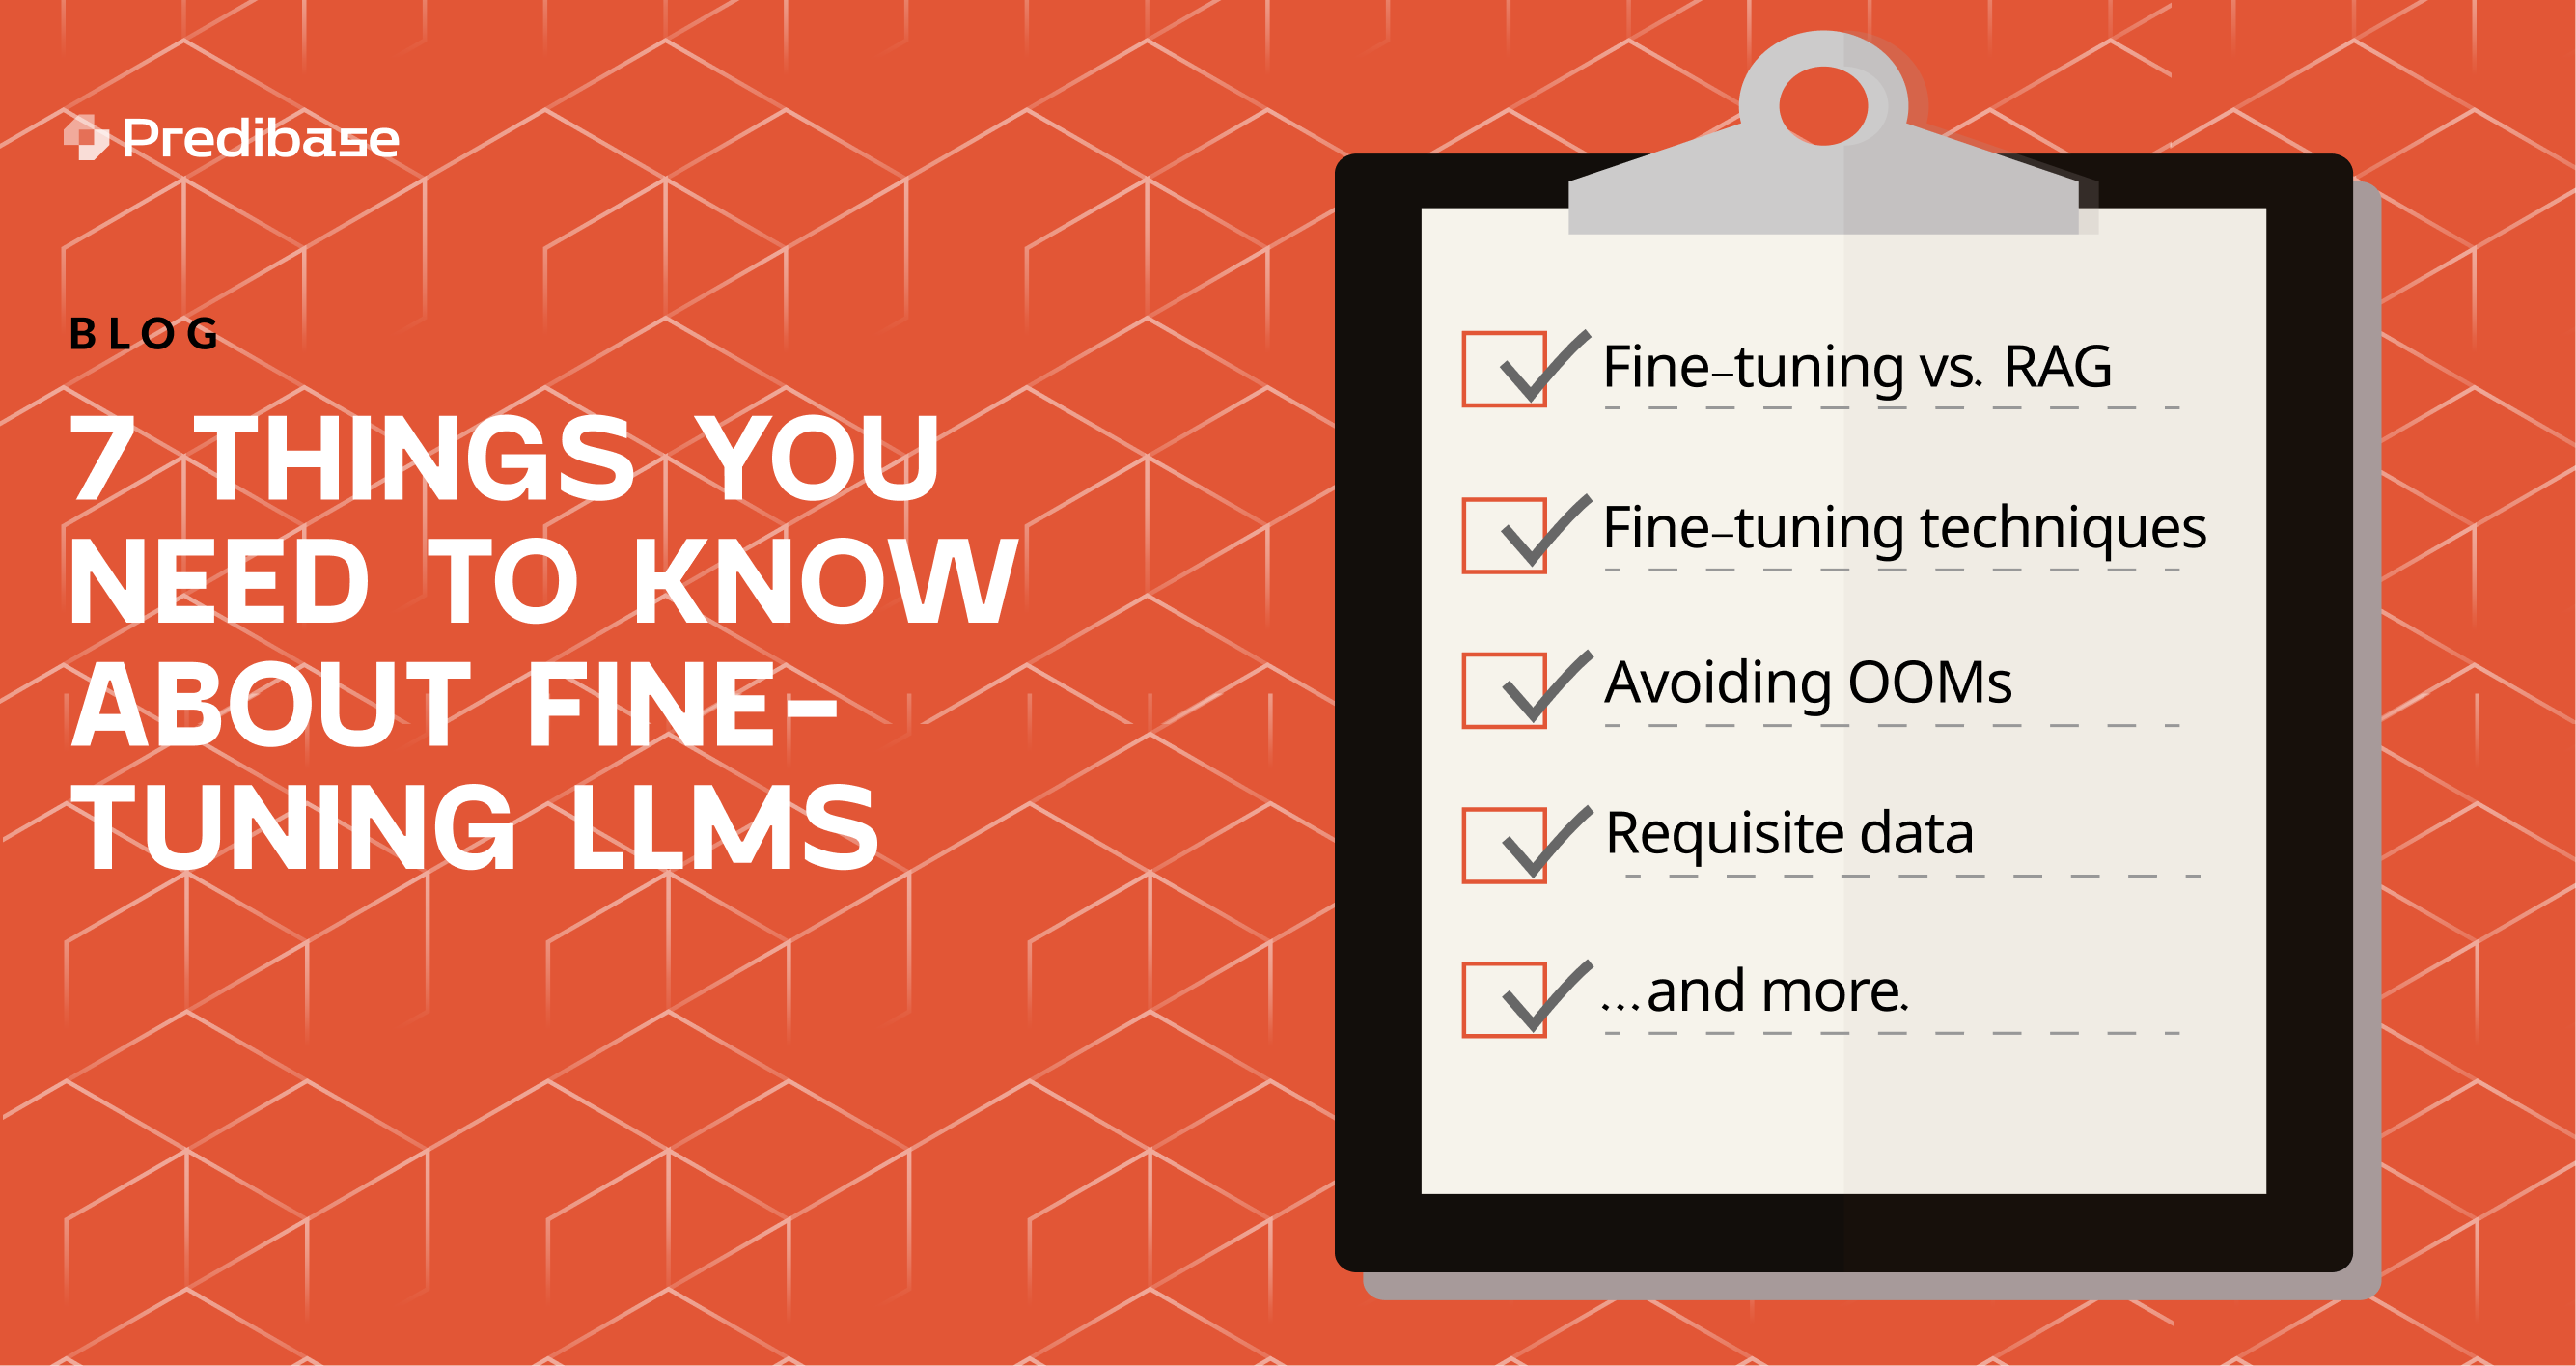 7 Things You Need to Know About Fine-tuning LLMs